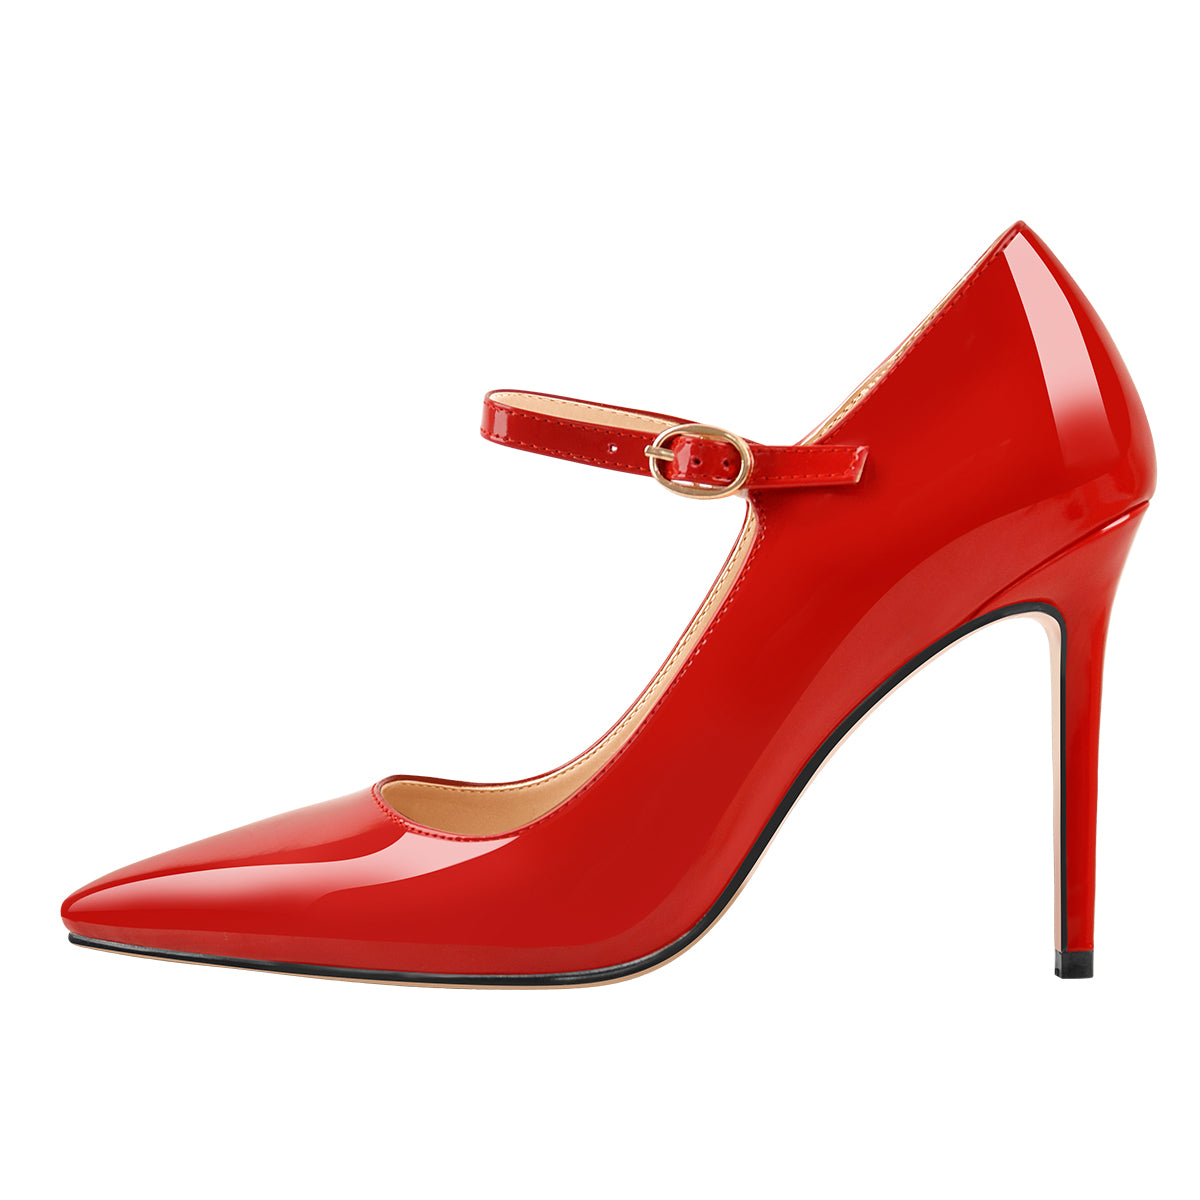 10cm Patent Red Pointed Toe High Heel Stiletto Pumps